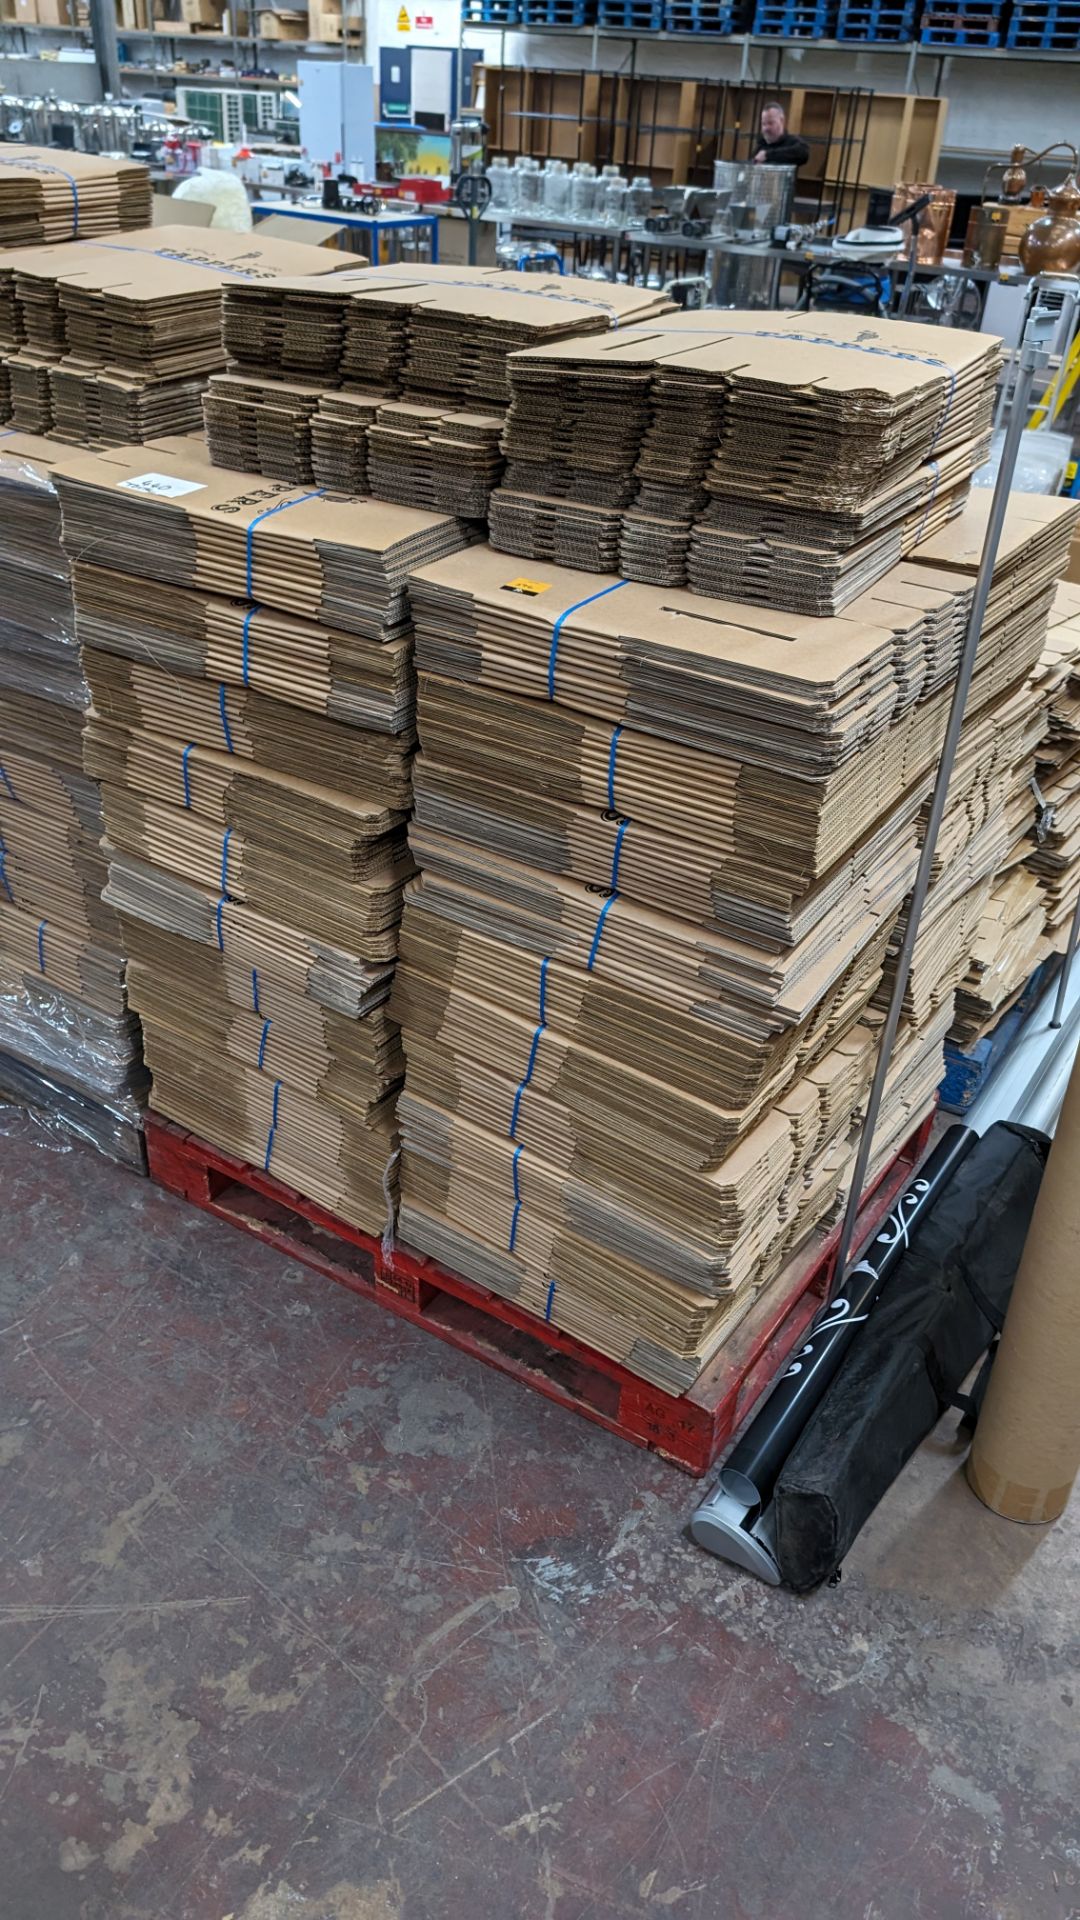 The contents of a pallet of flatpack cardboard boxes in 4 stacks. Each box when assembled incorpora - Image 2 of 7